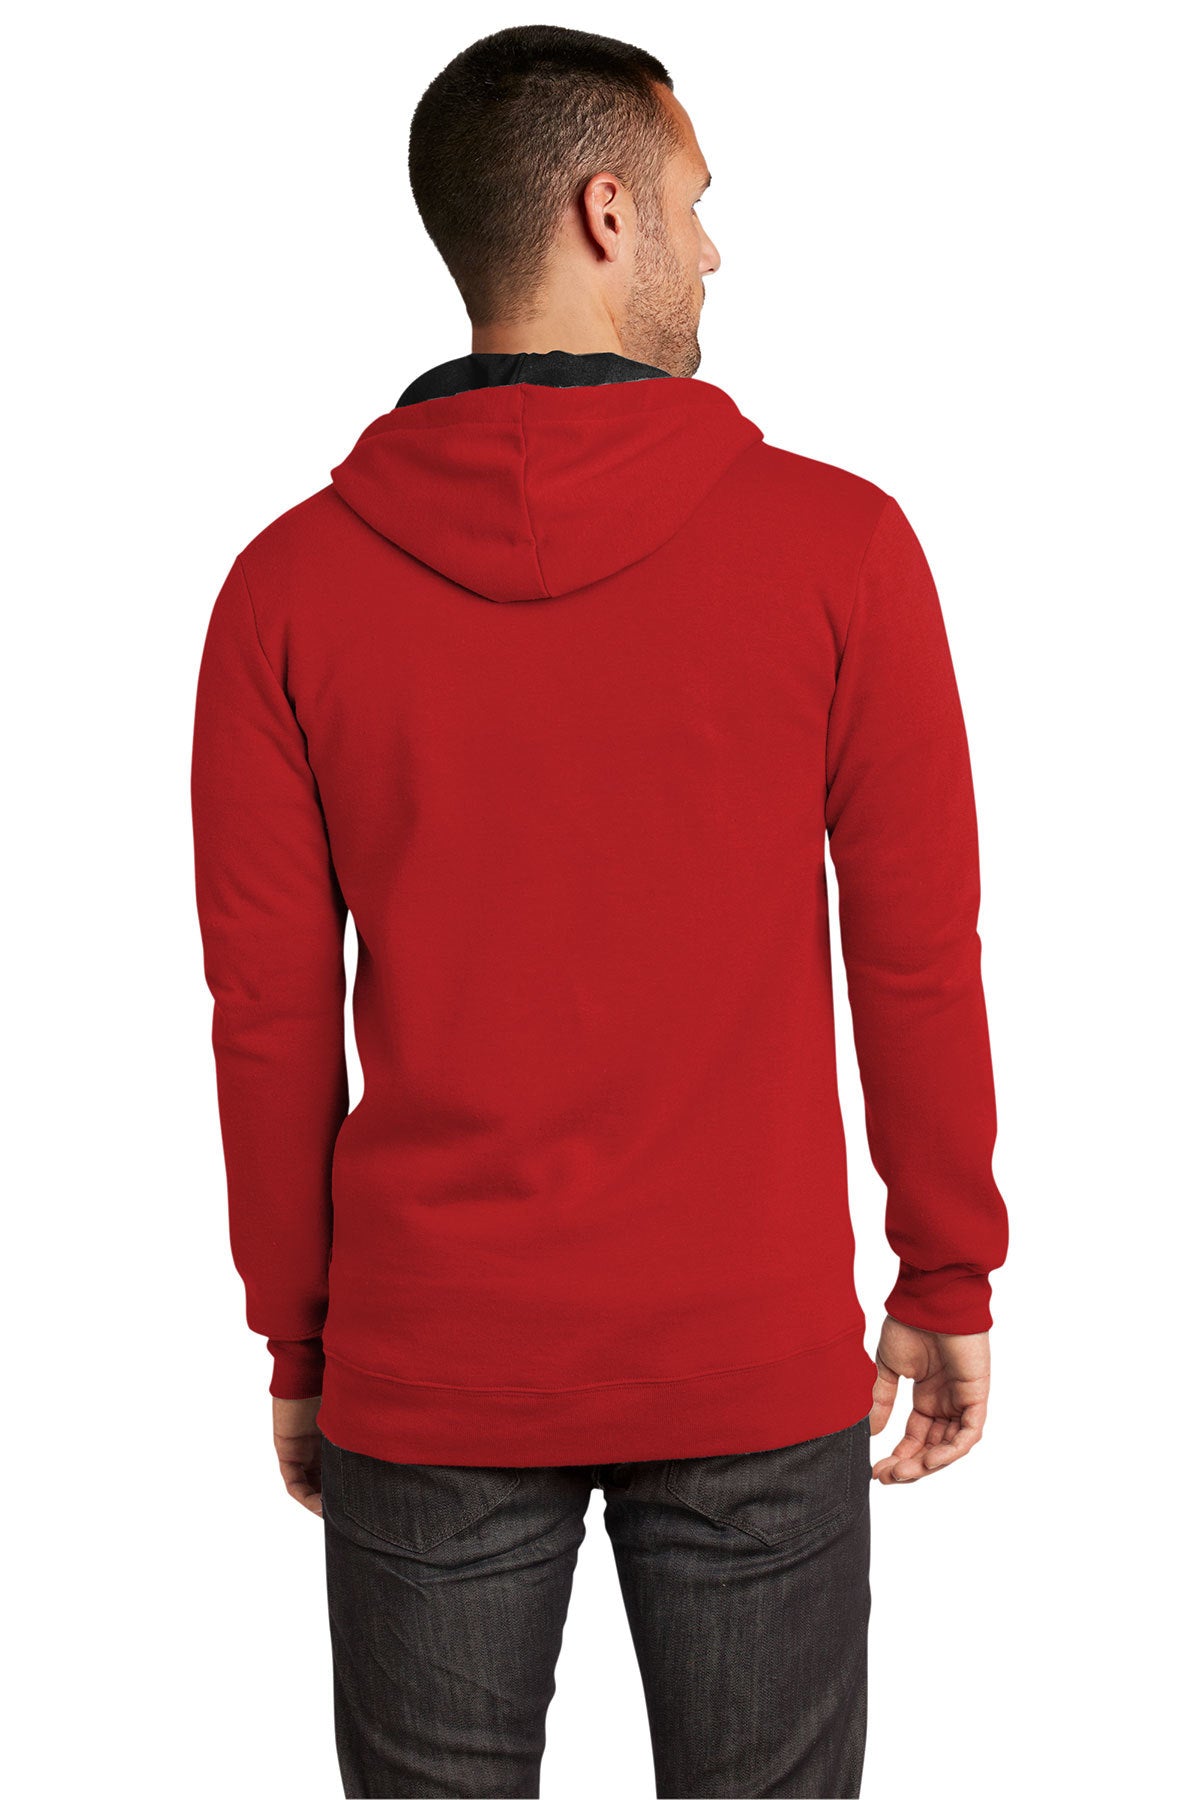 district_dt800 _new red_company_logo_sweatshirts